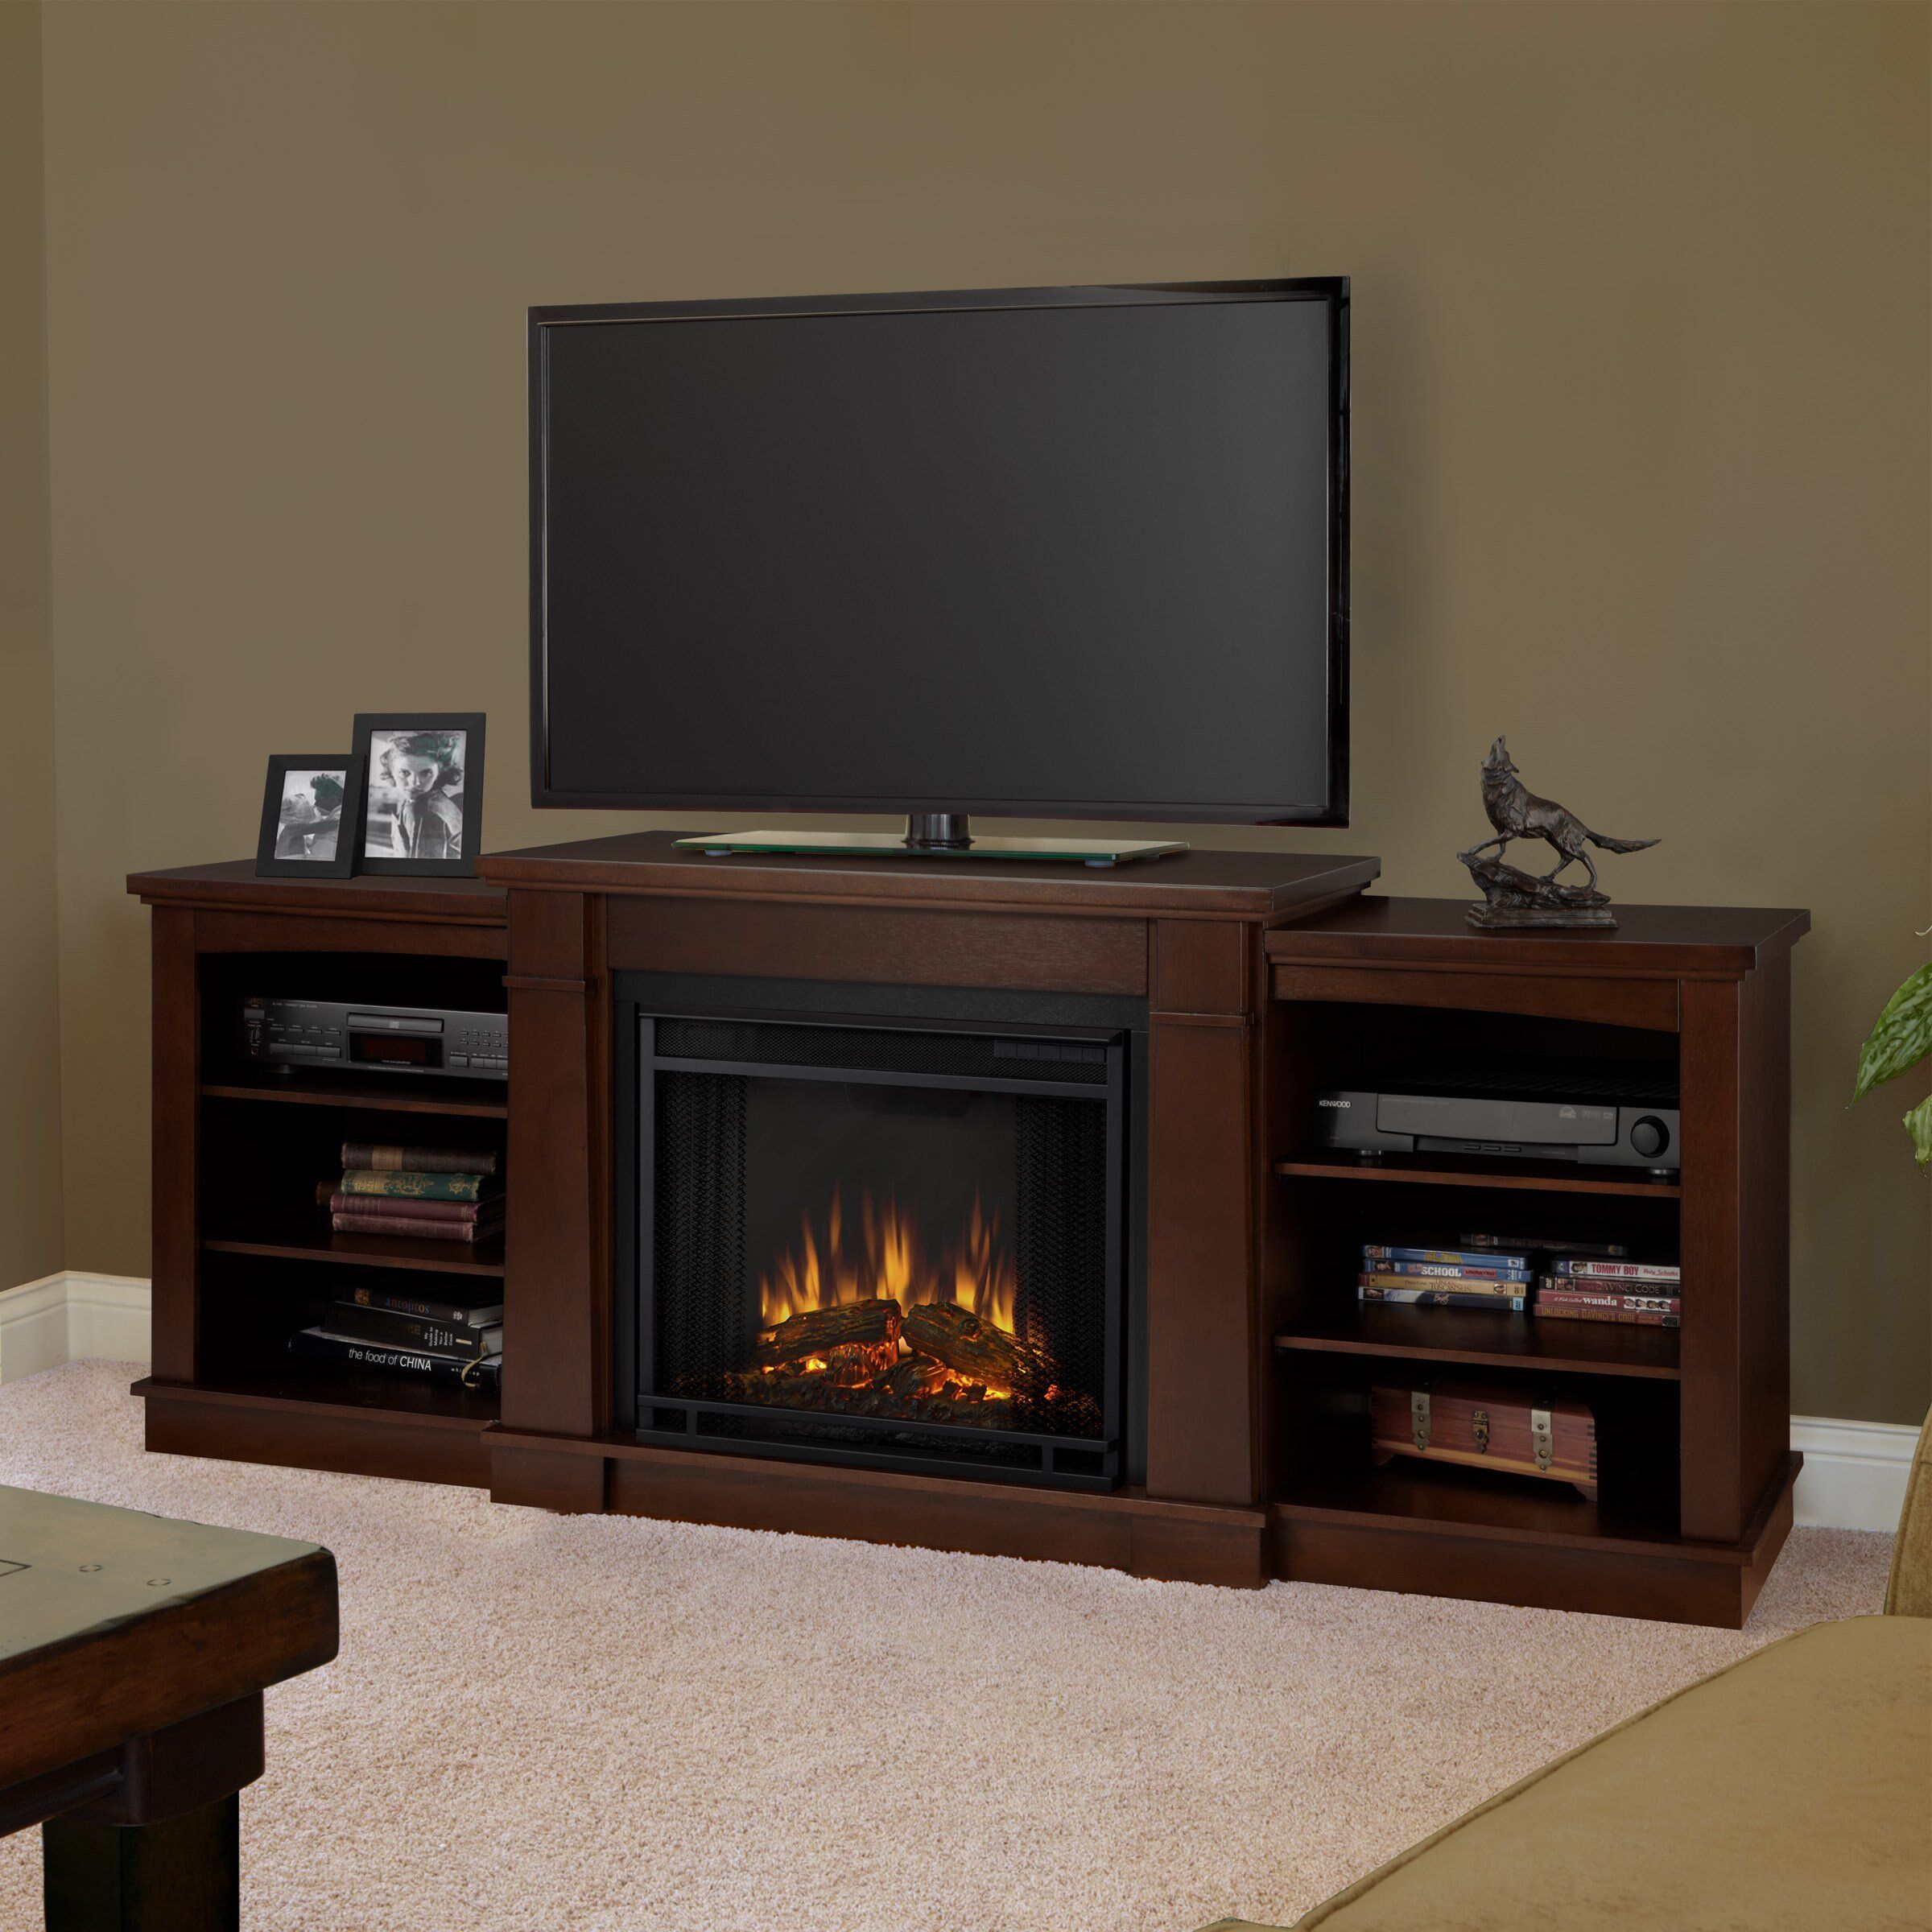 Real Flame Hawthorne Tv Stand With Electric Fireplace & Reviews | Wayfair Intended For Electric Fireplace Tv Stands (View 15 of 20)